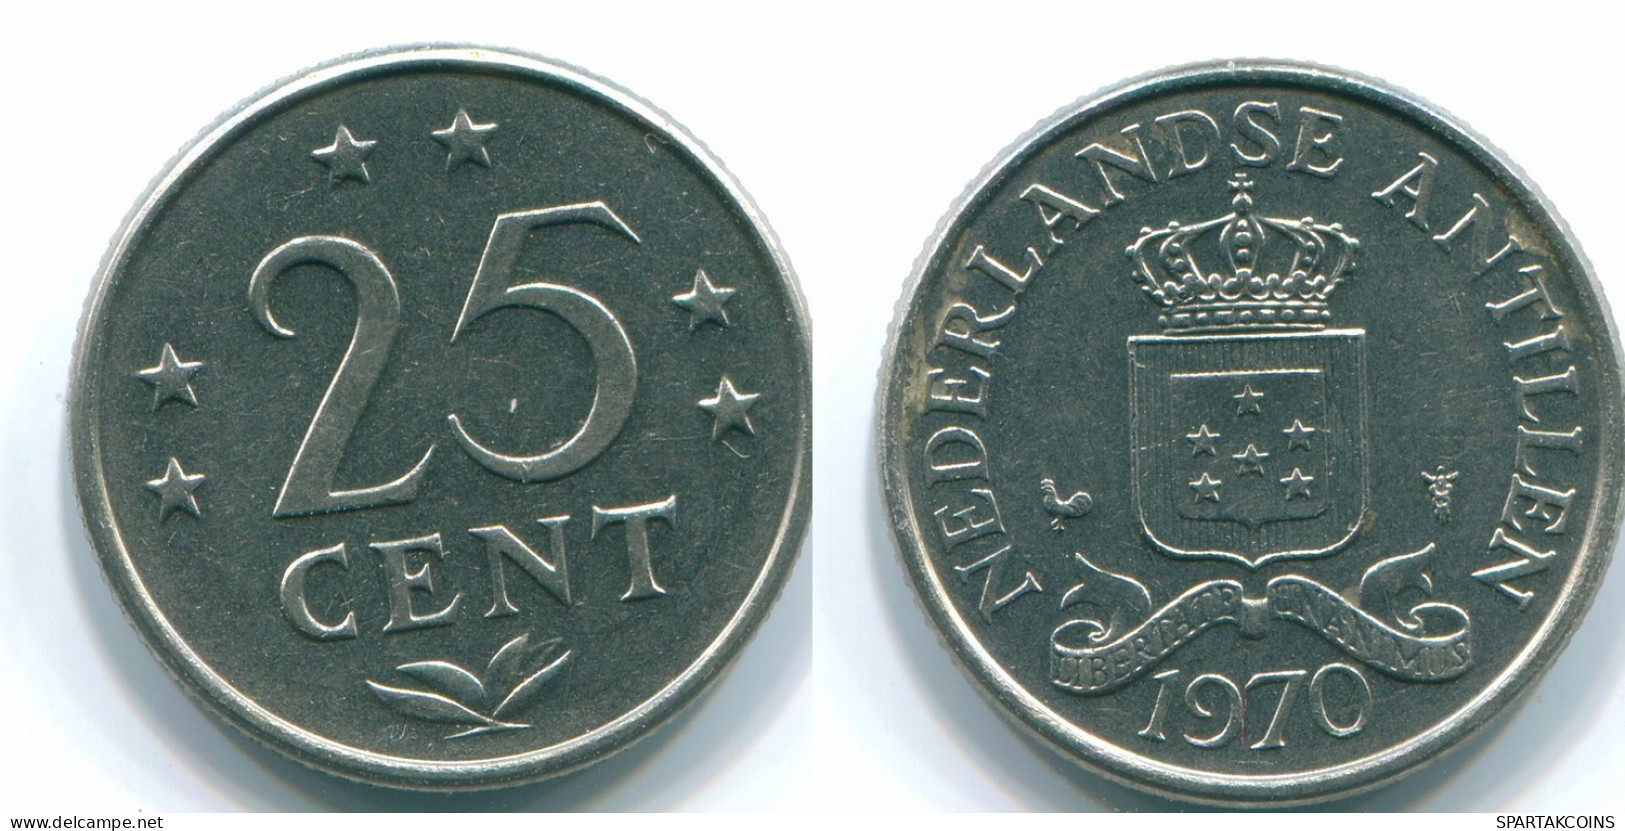 25 CENTS 1970 NETHERLANDS ANTILLES Nickel Colonial Coin #S11450.U.A - Antille Olandesi